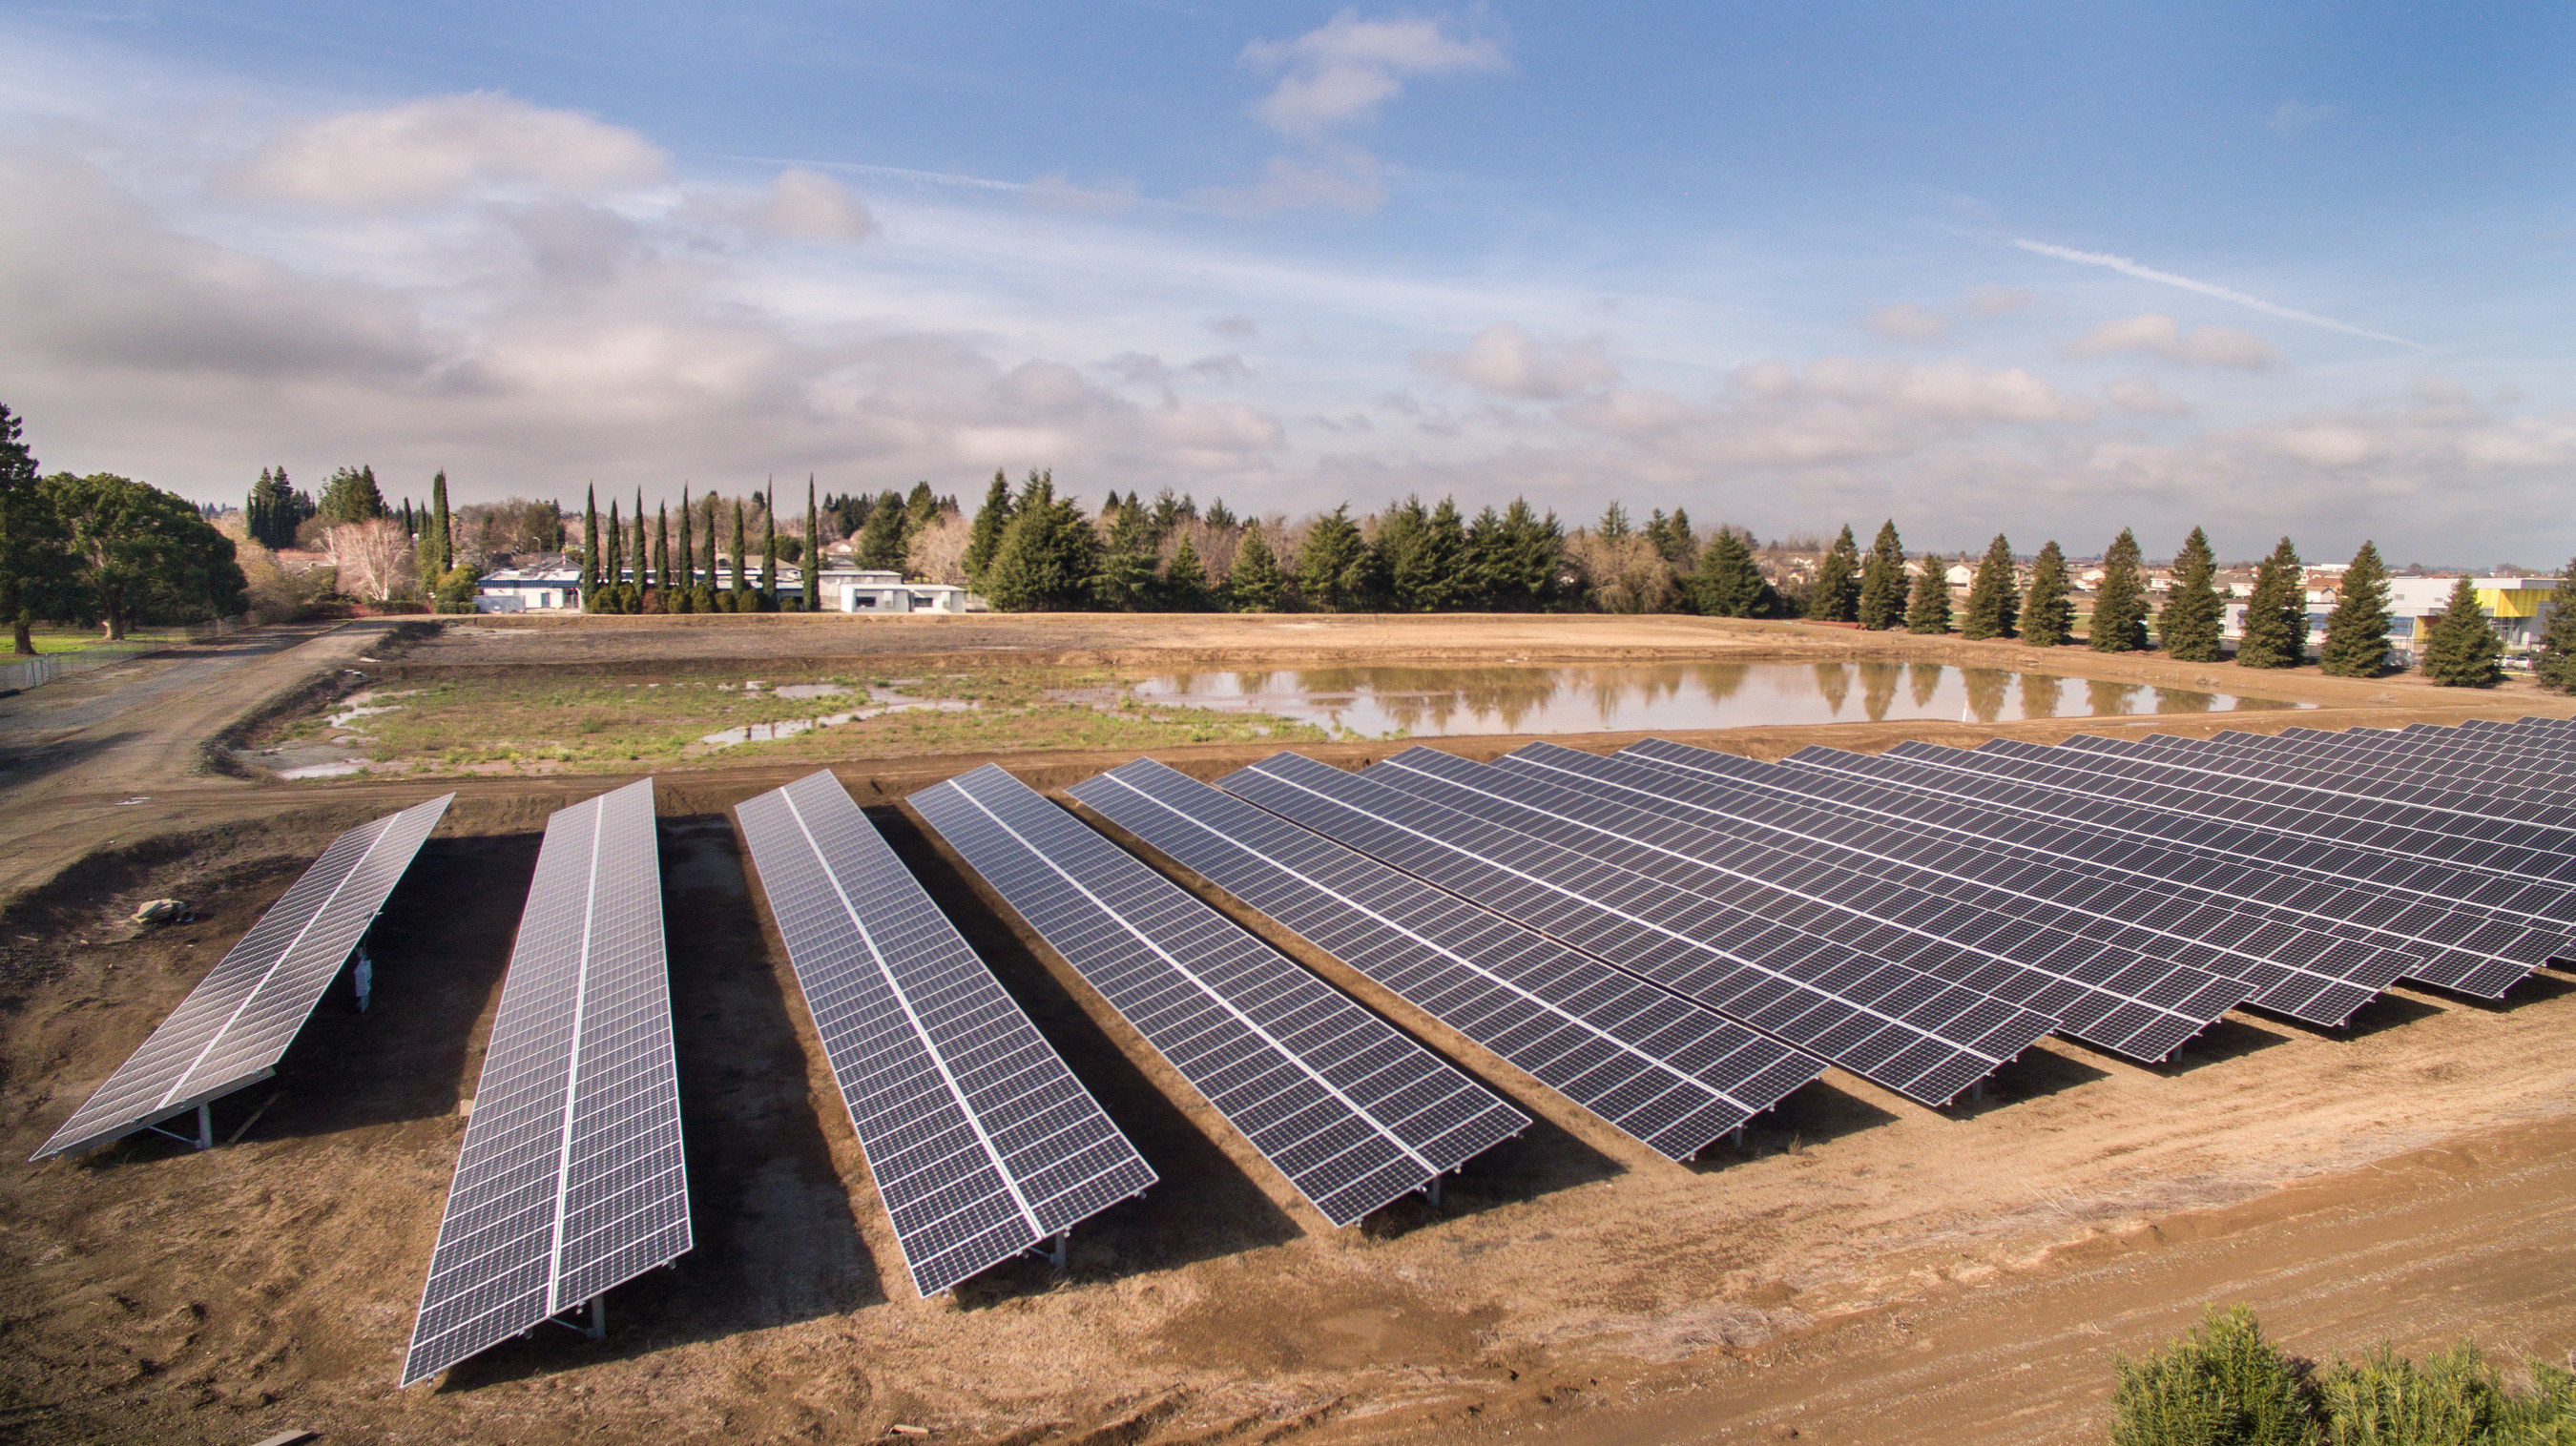 Solar installed by OpTerra Energy Services for Yuba City, CA, is part of a larger, comprehensive energy project that will save the City $6 million in energy costs.